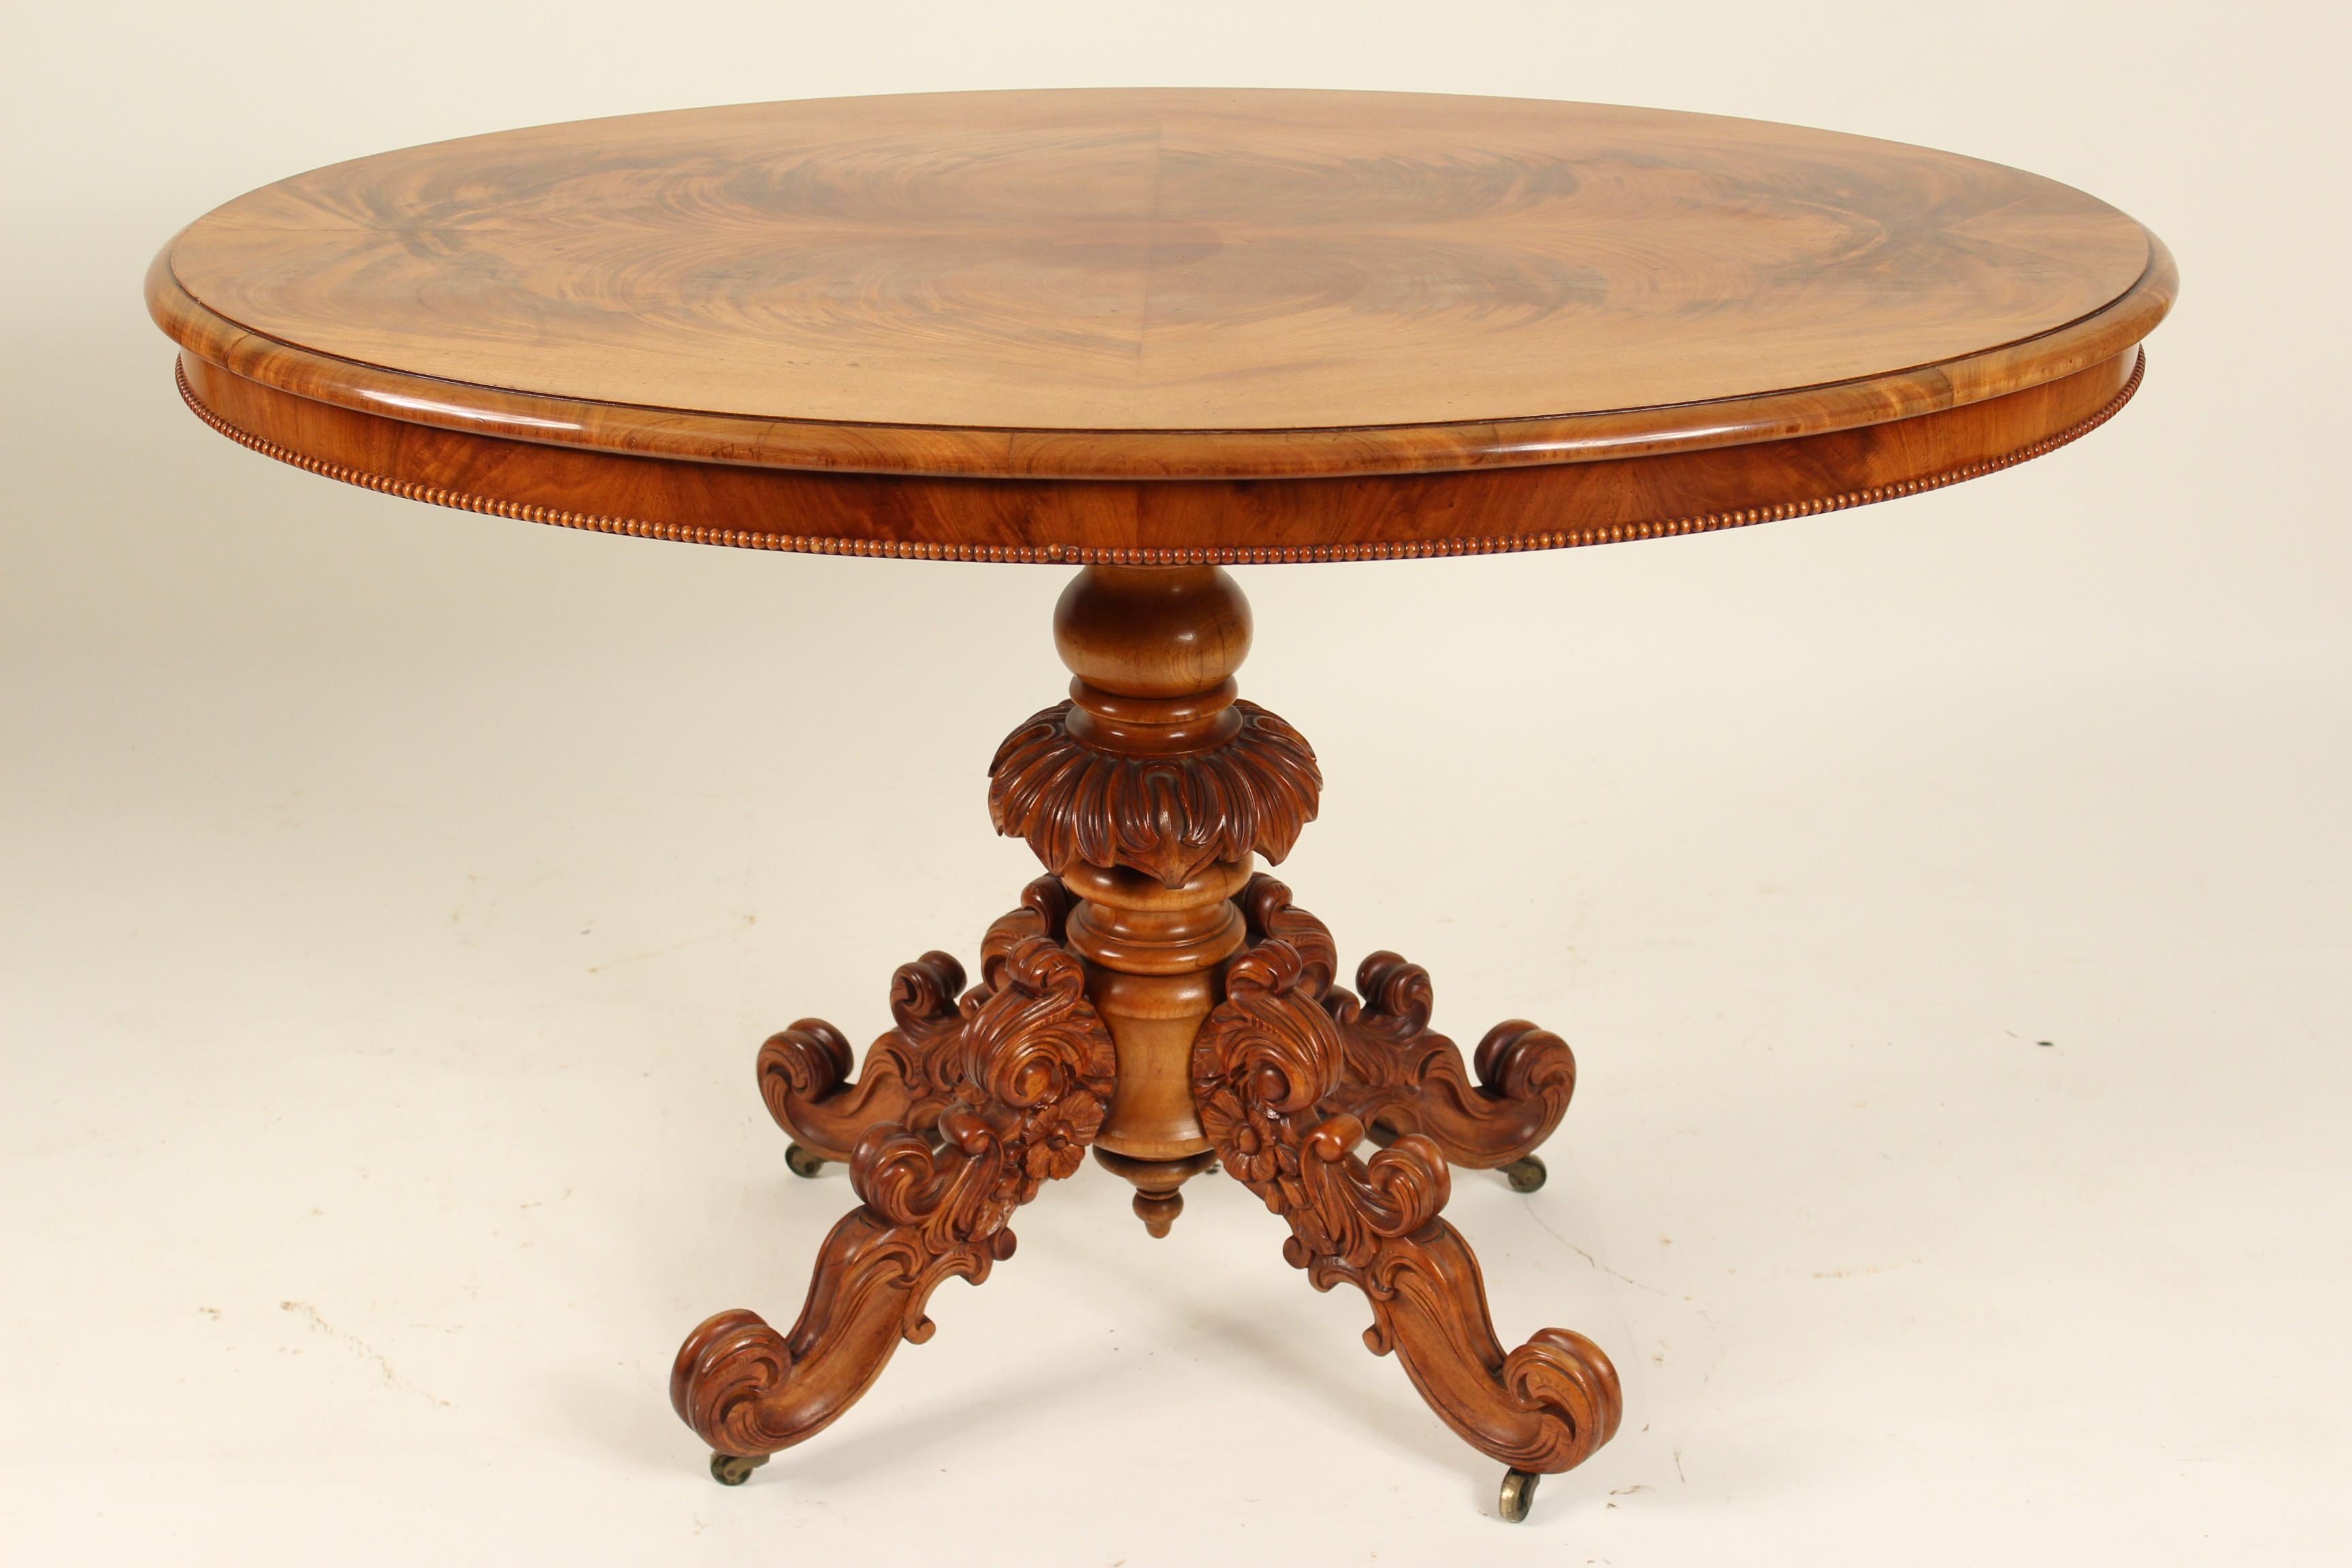 English loo table with an excellent book matched flame mahogany top and a vigorously carved pedestal base, circa 1900.